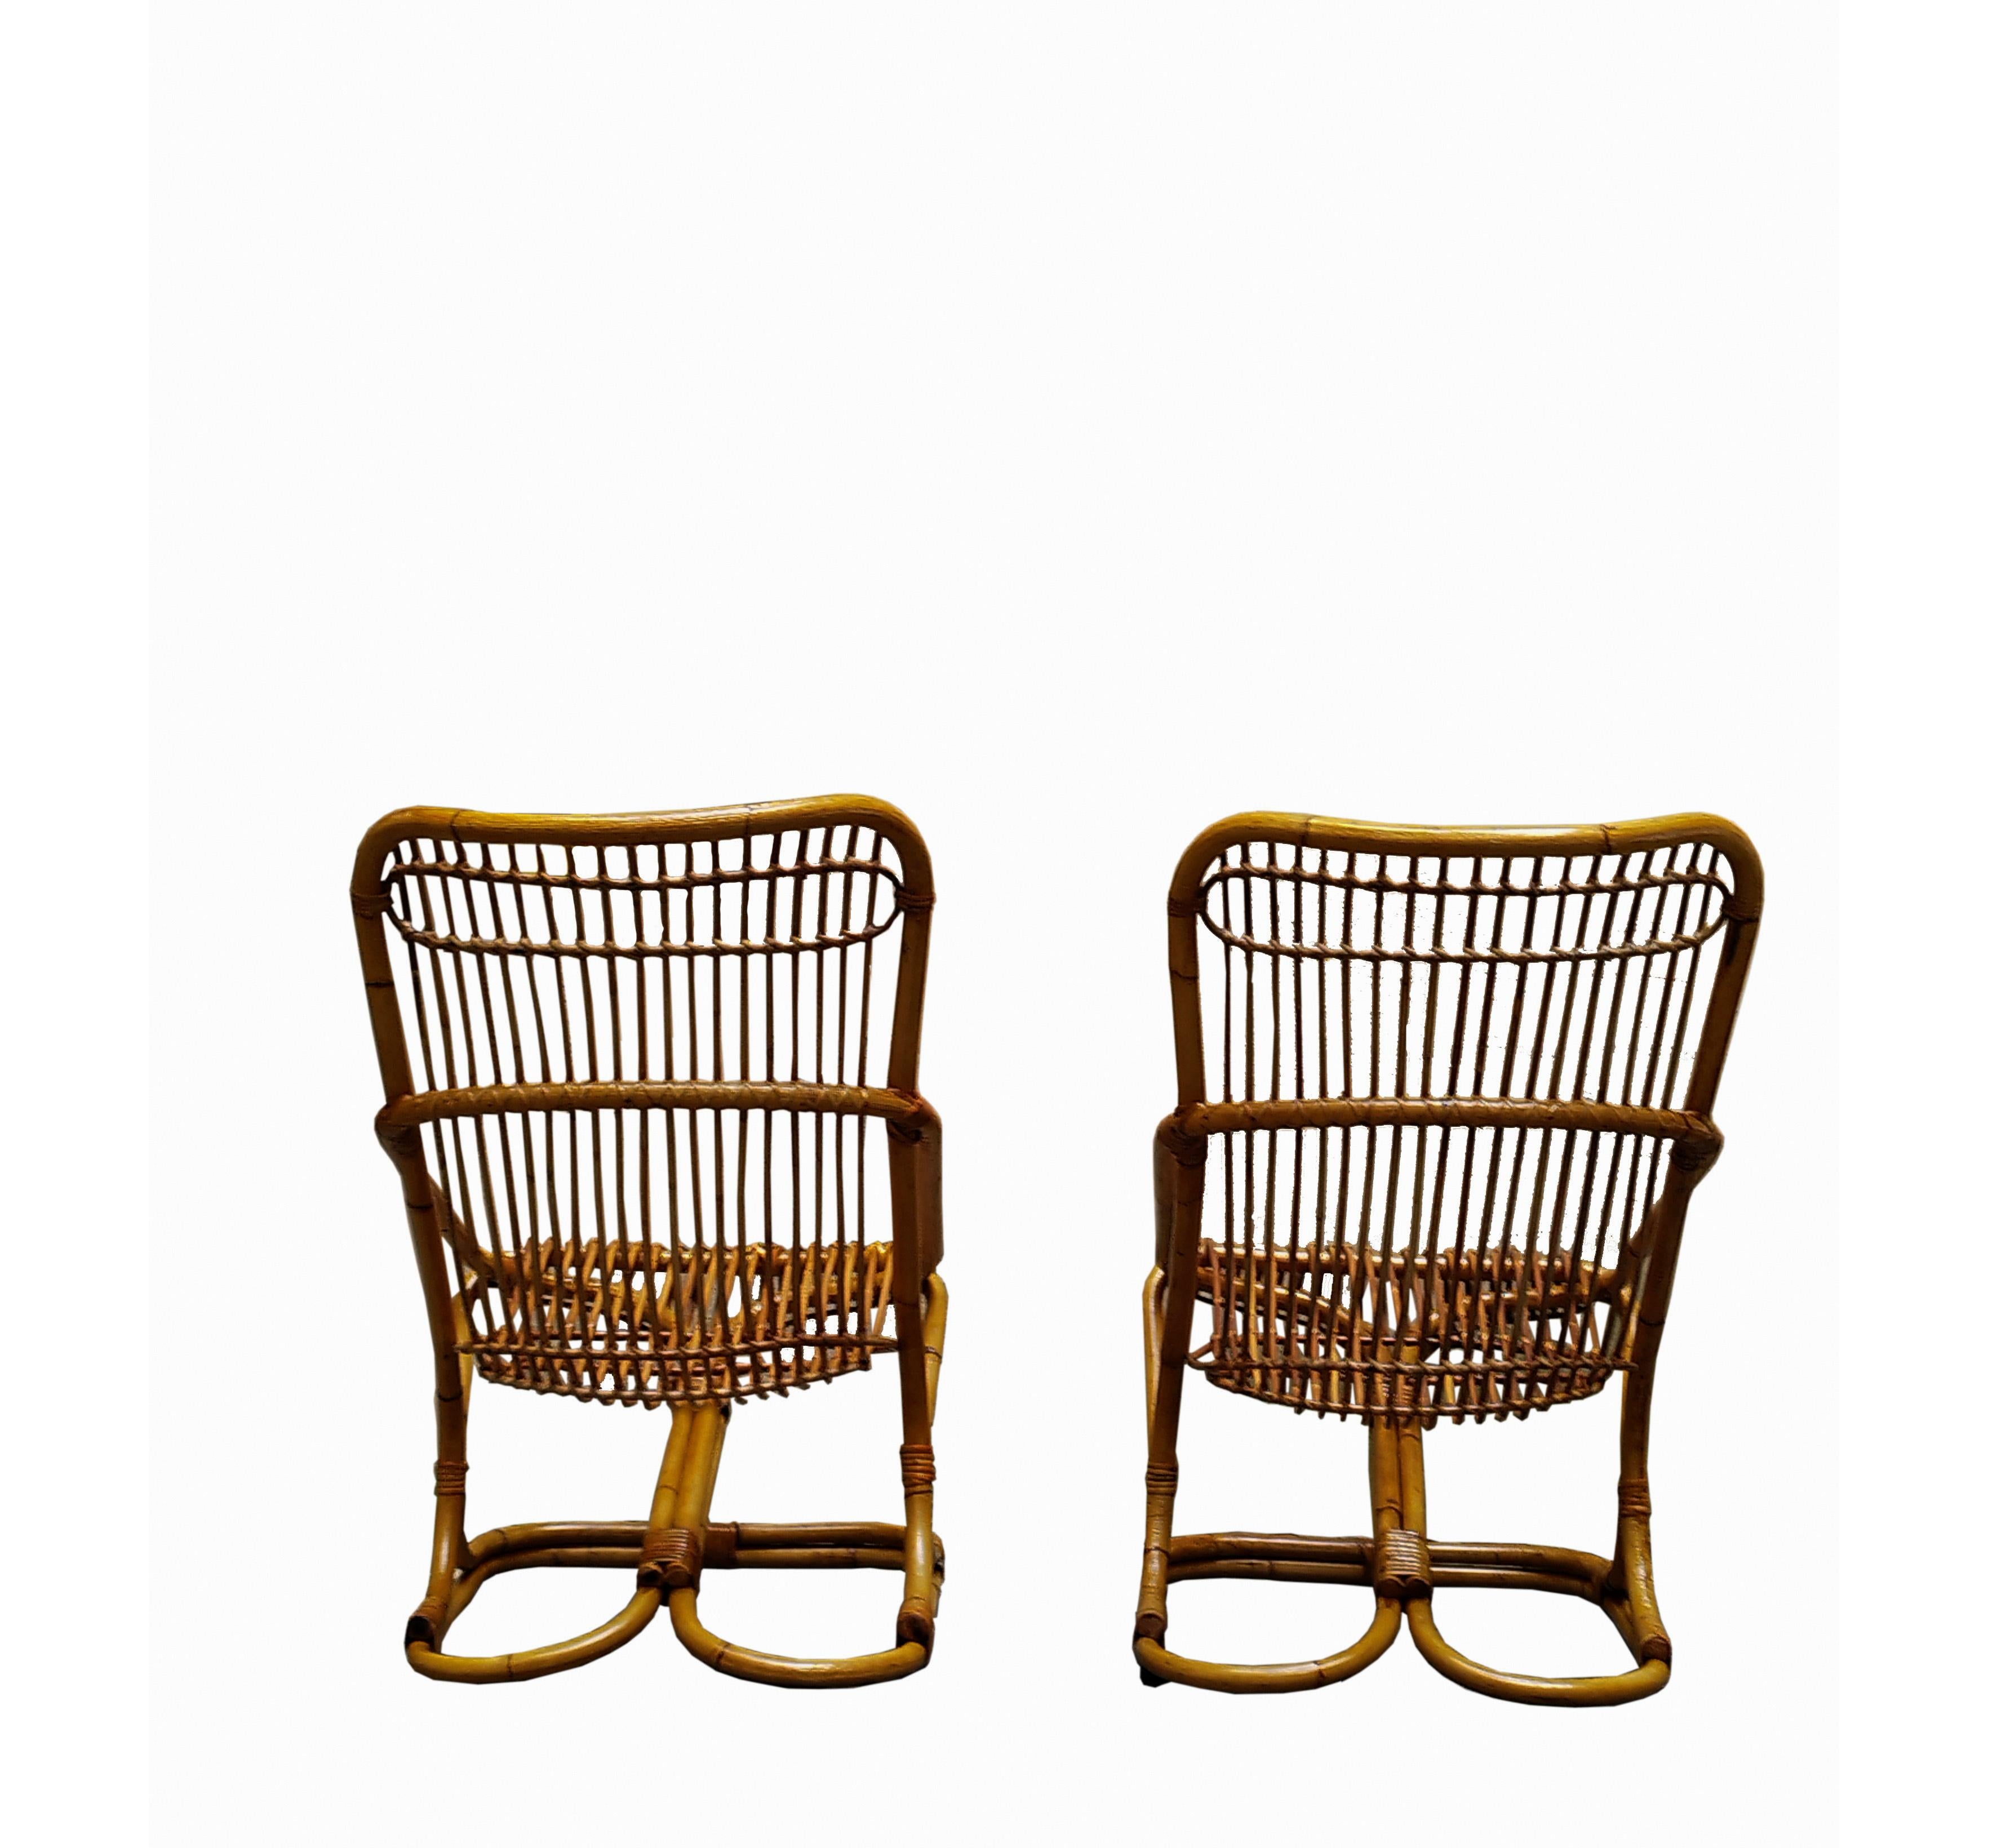 Tito Agnoli for Bonacina Pair of Rattan Armachairs, Italy, 1960s In Good Condition For Sale In Naples, IT